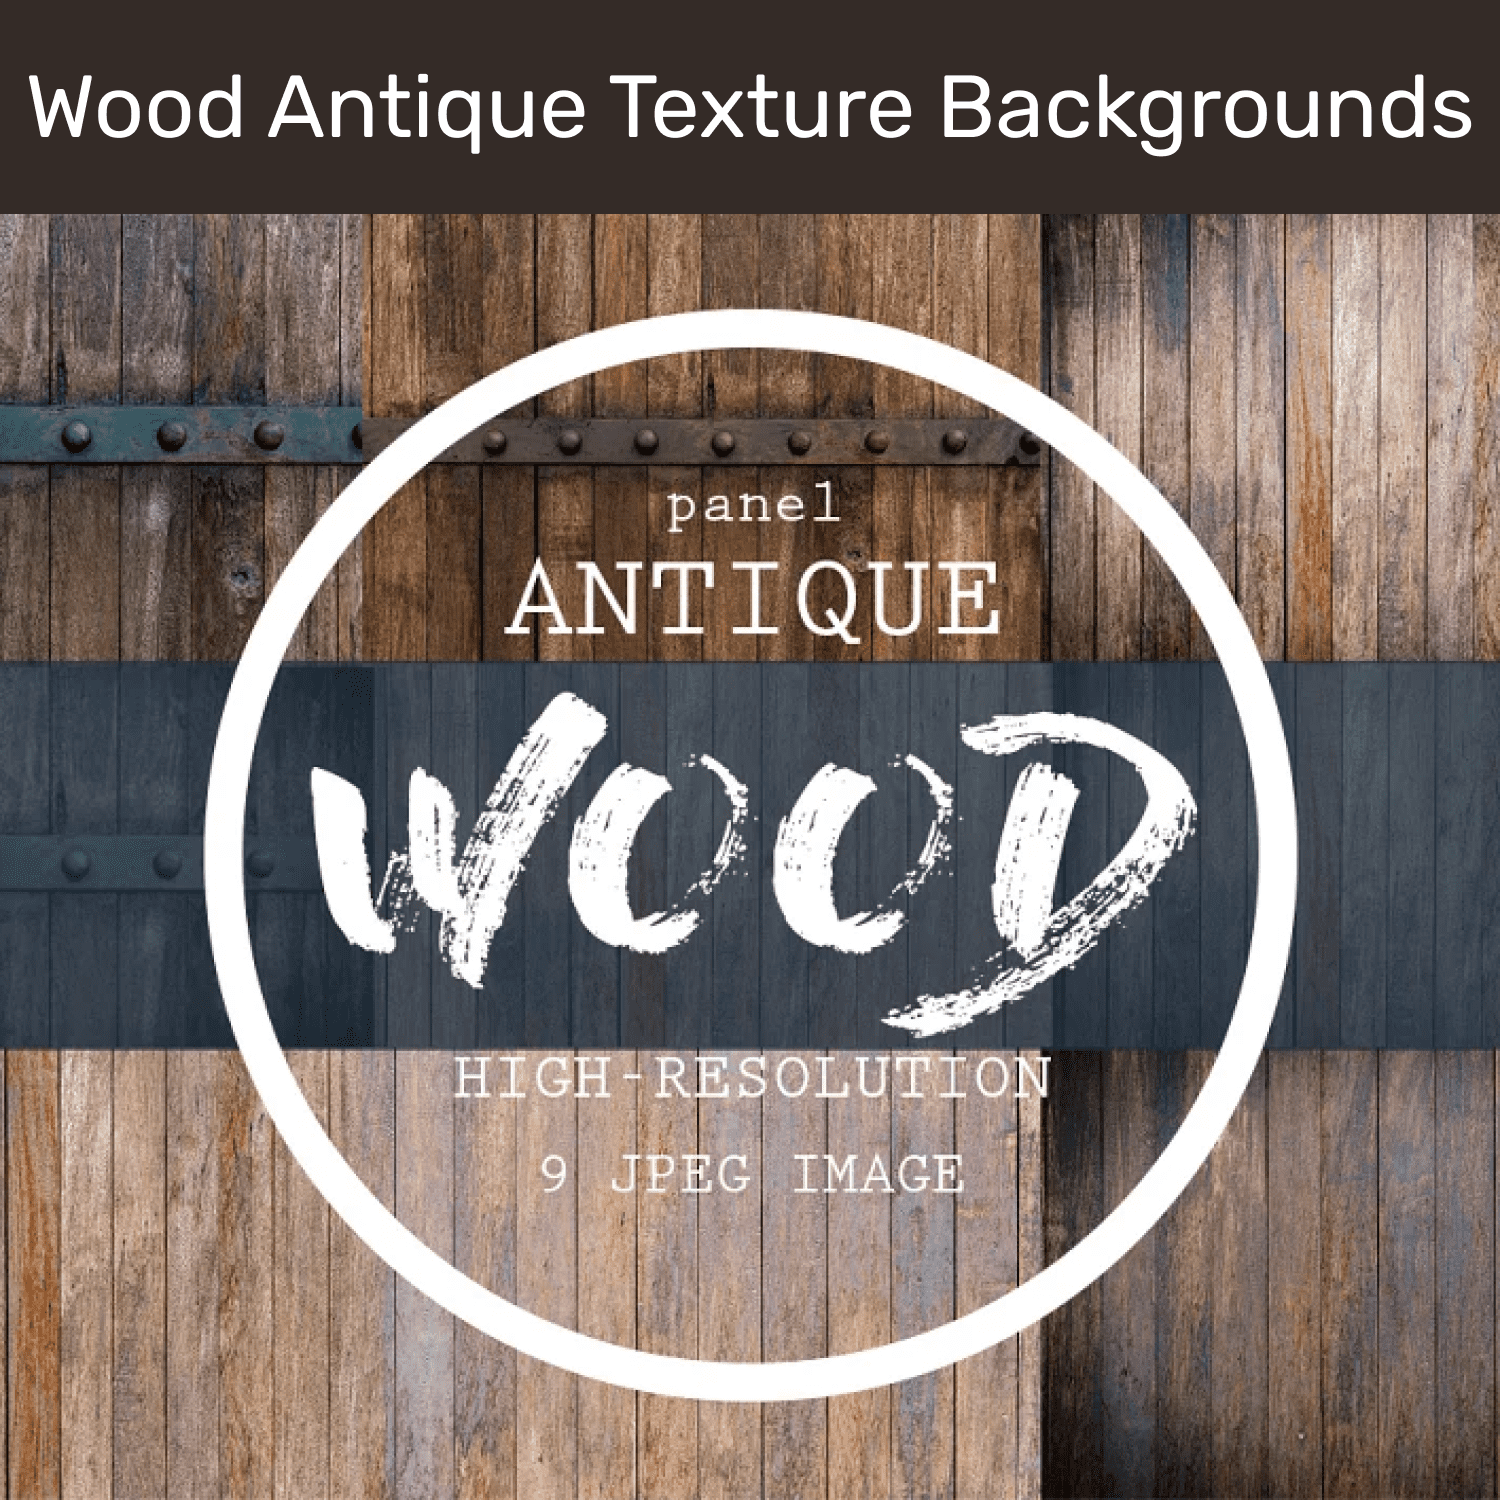 Wood Antique Texture Backgrounds cover.